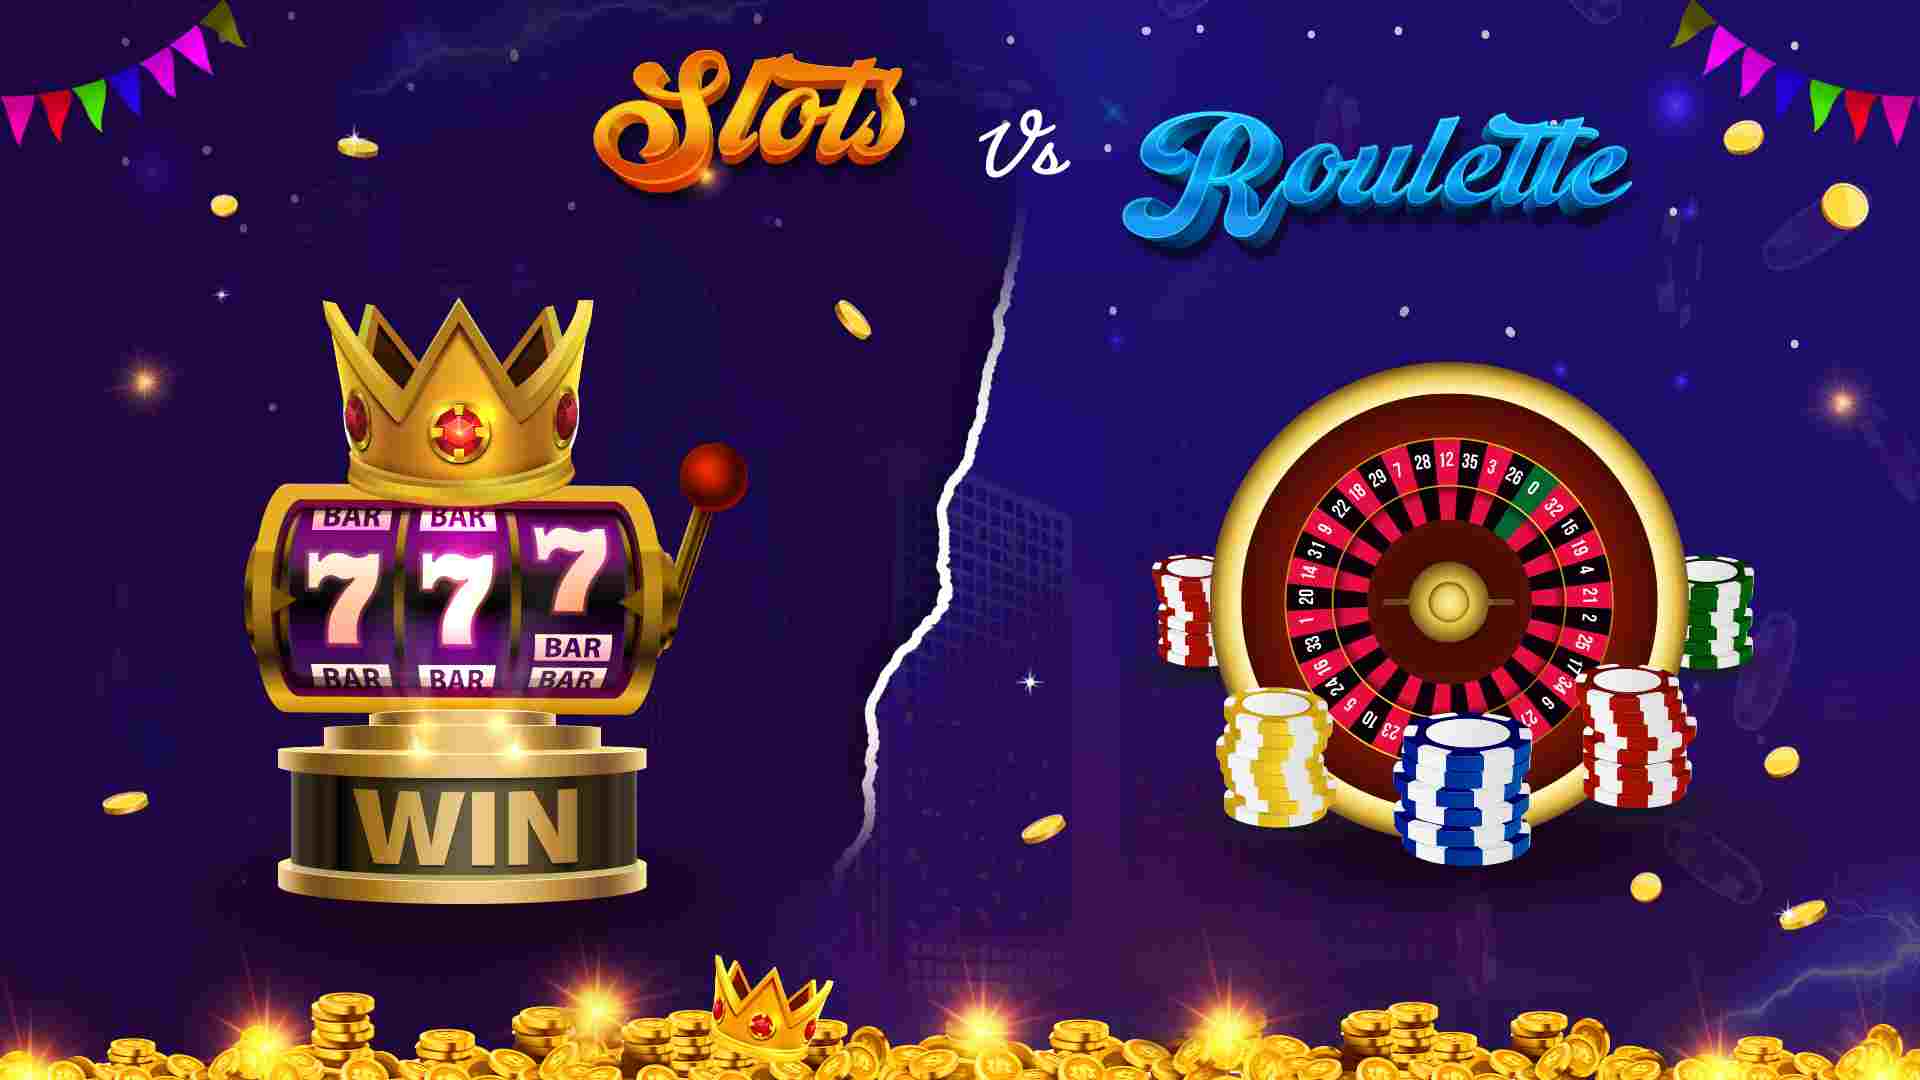 7 Reasons Why Orion Stars Slots Are Better Than Roulette